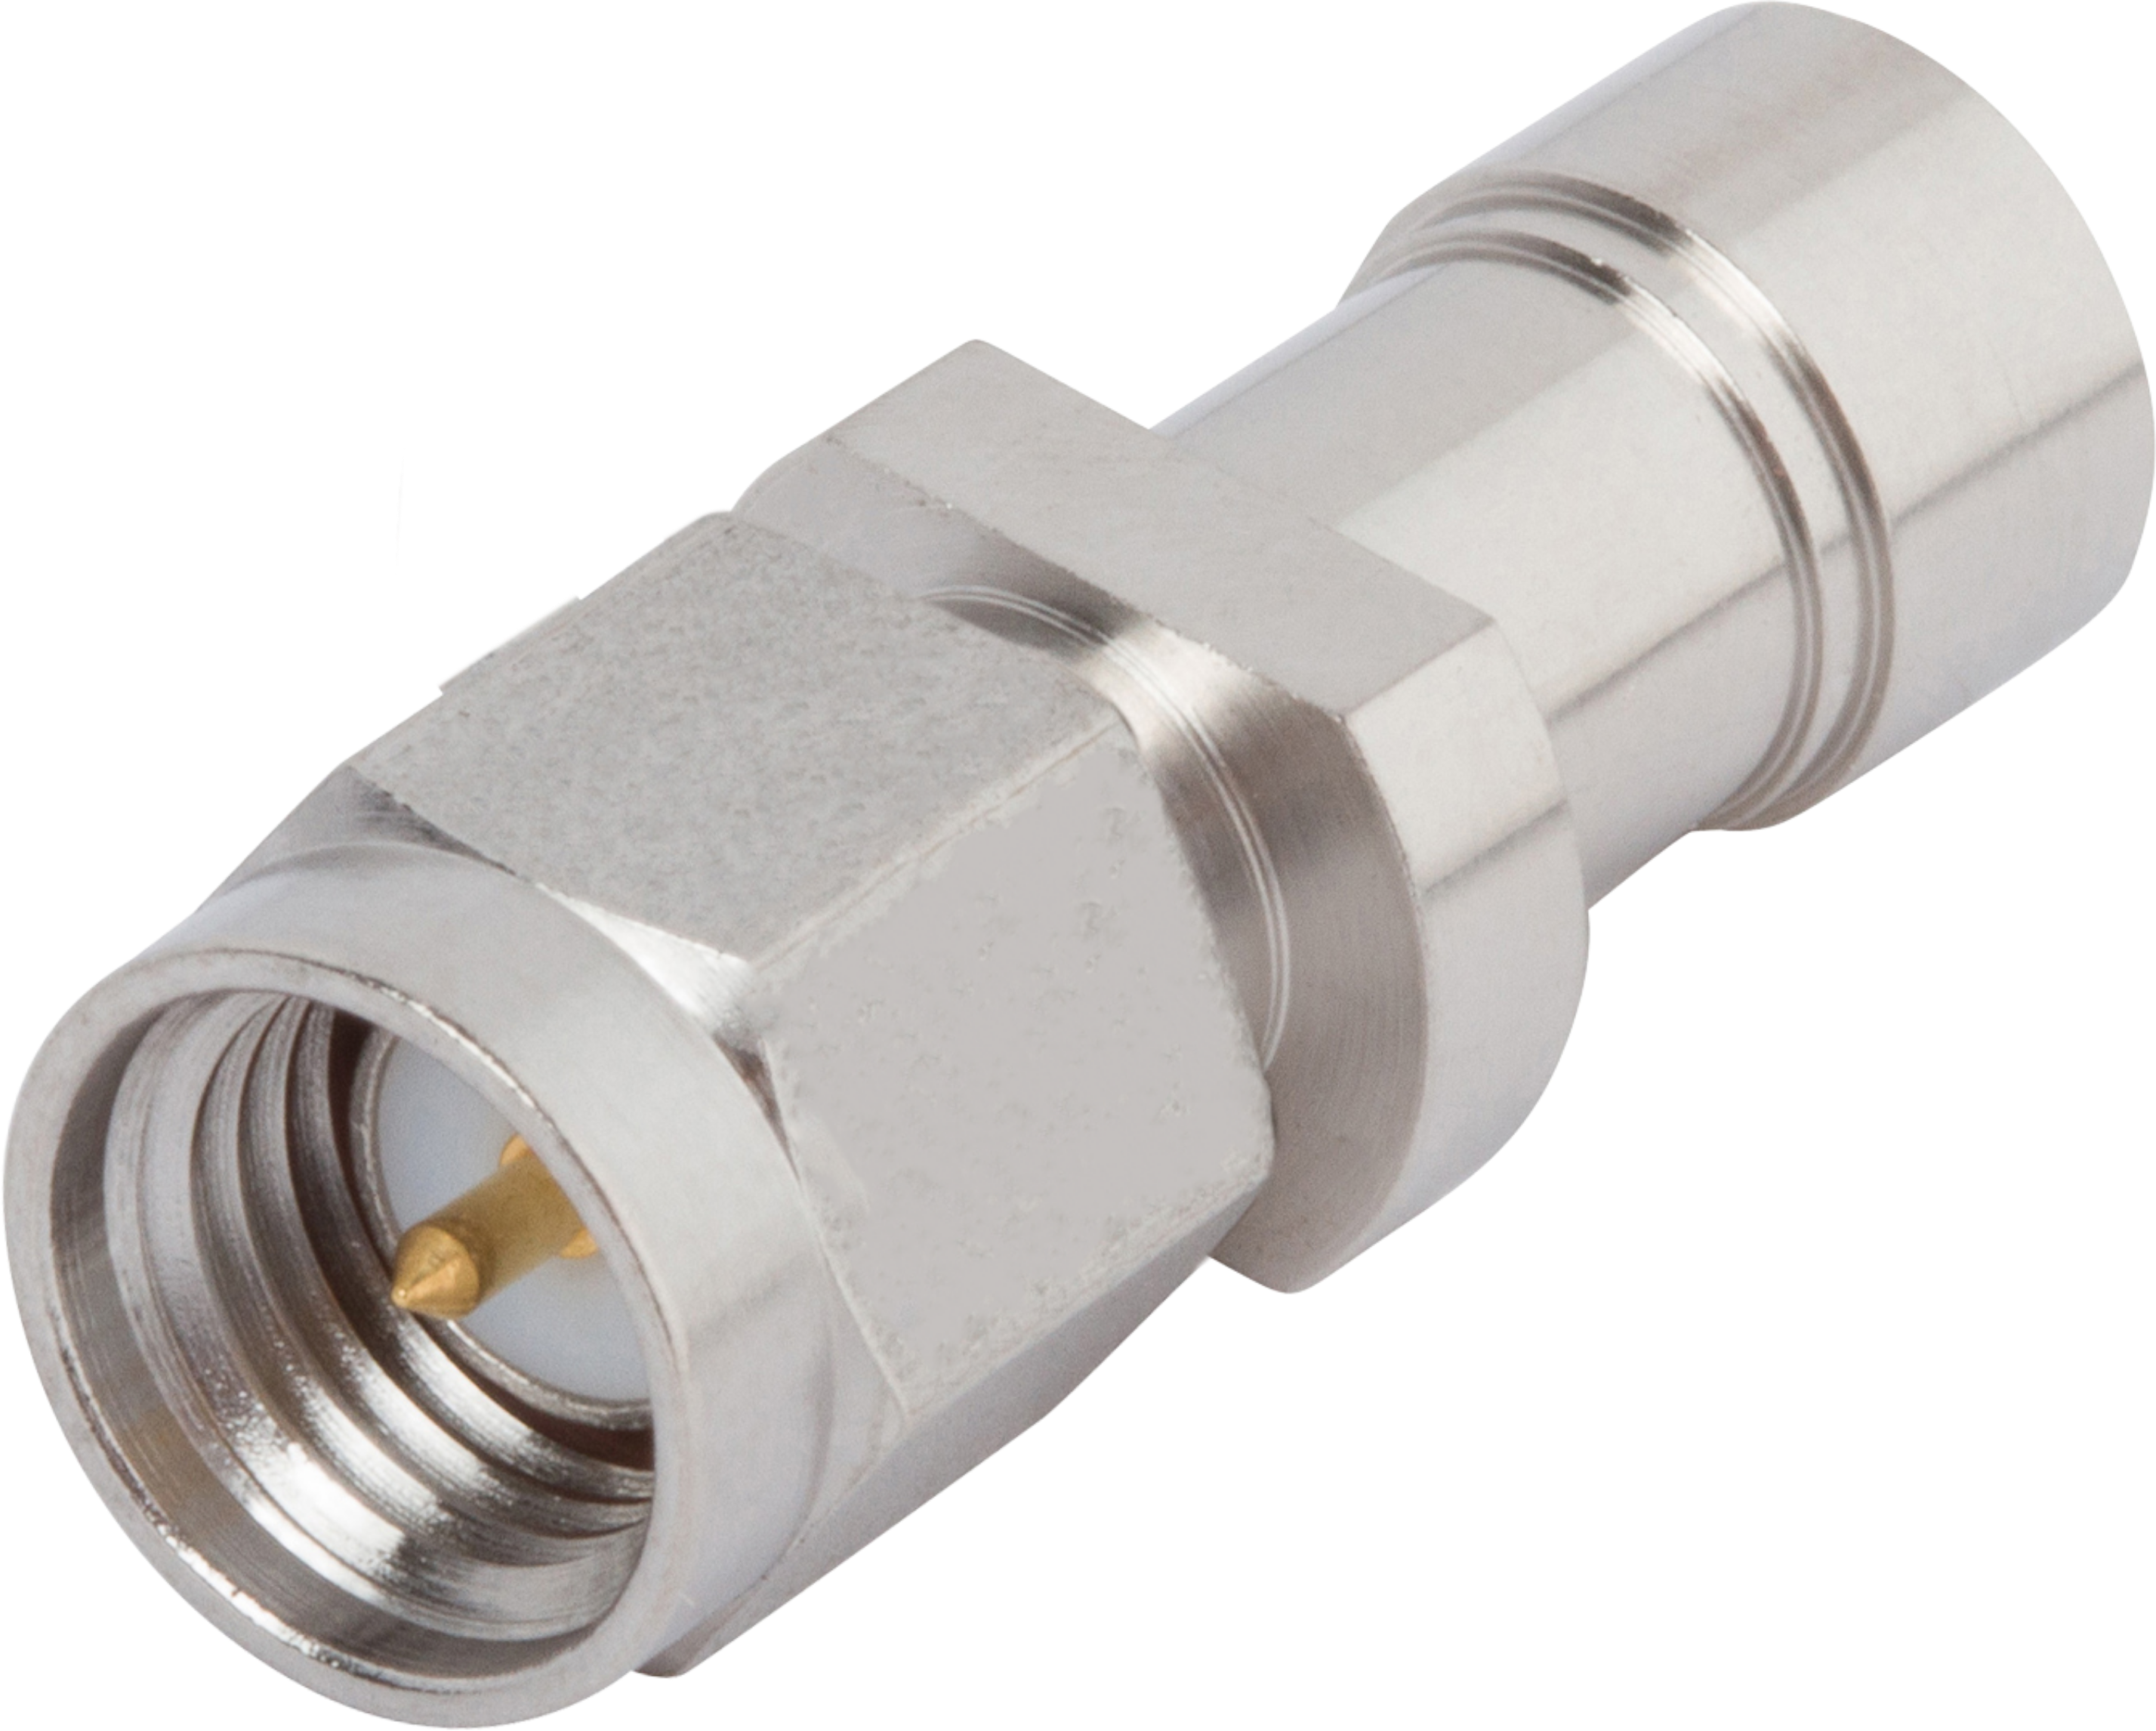 BMZ Male to SMA Male Adapter, SF1189-6009